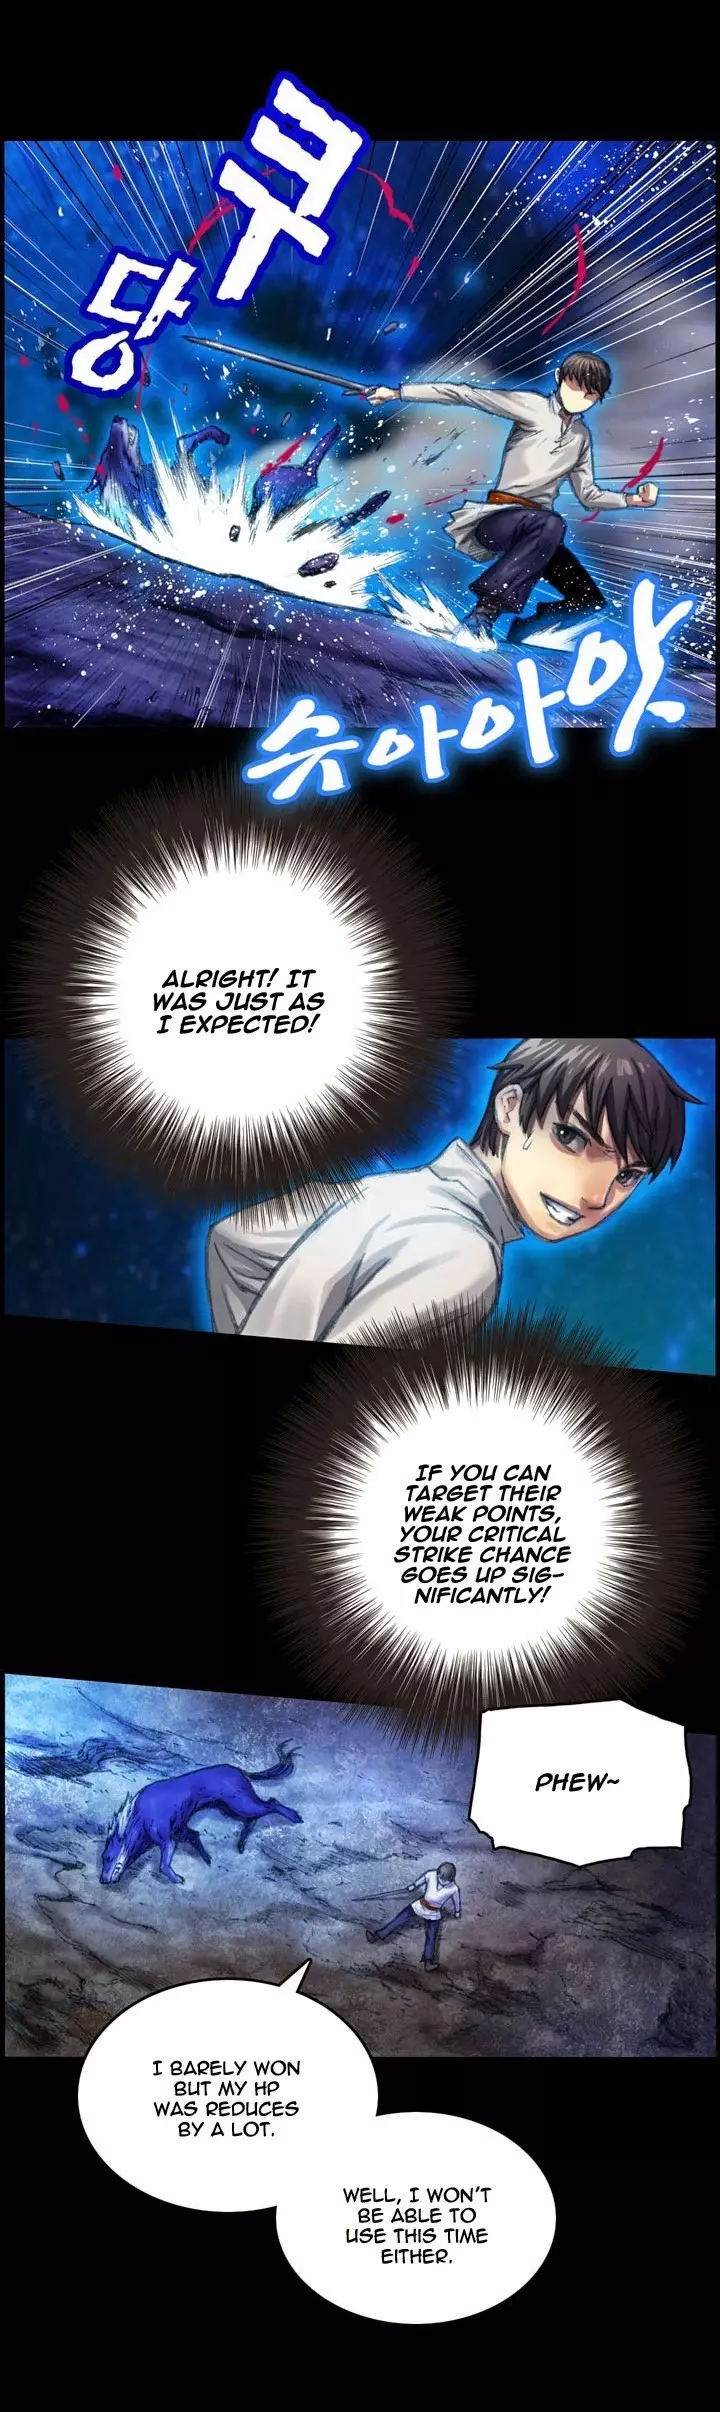 The Legendary Moonlight Sculptor - 12 page p_00014